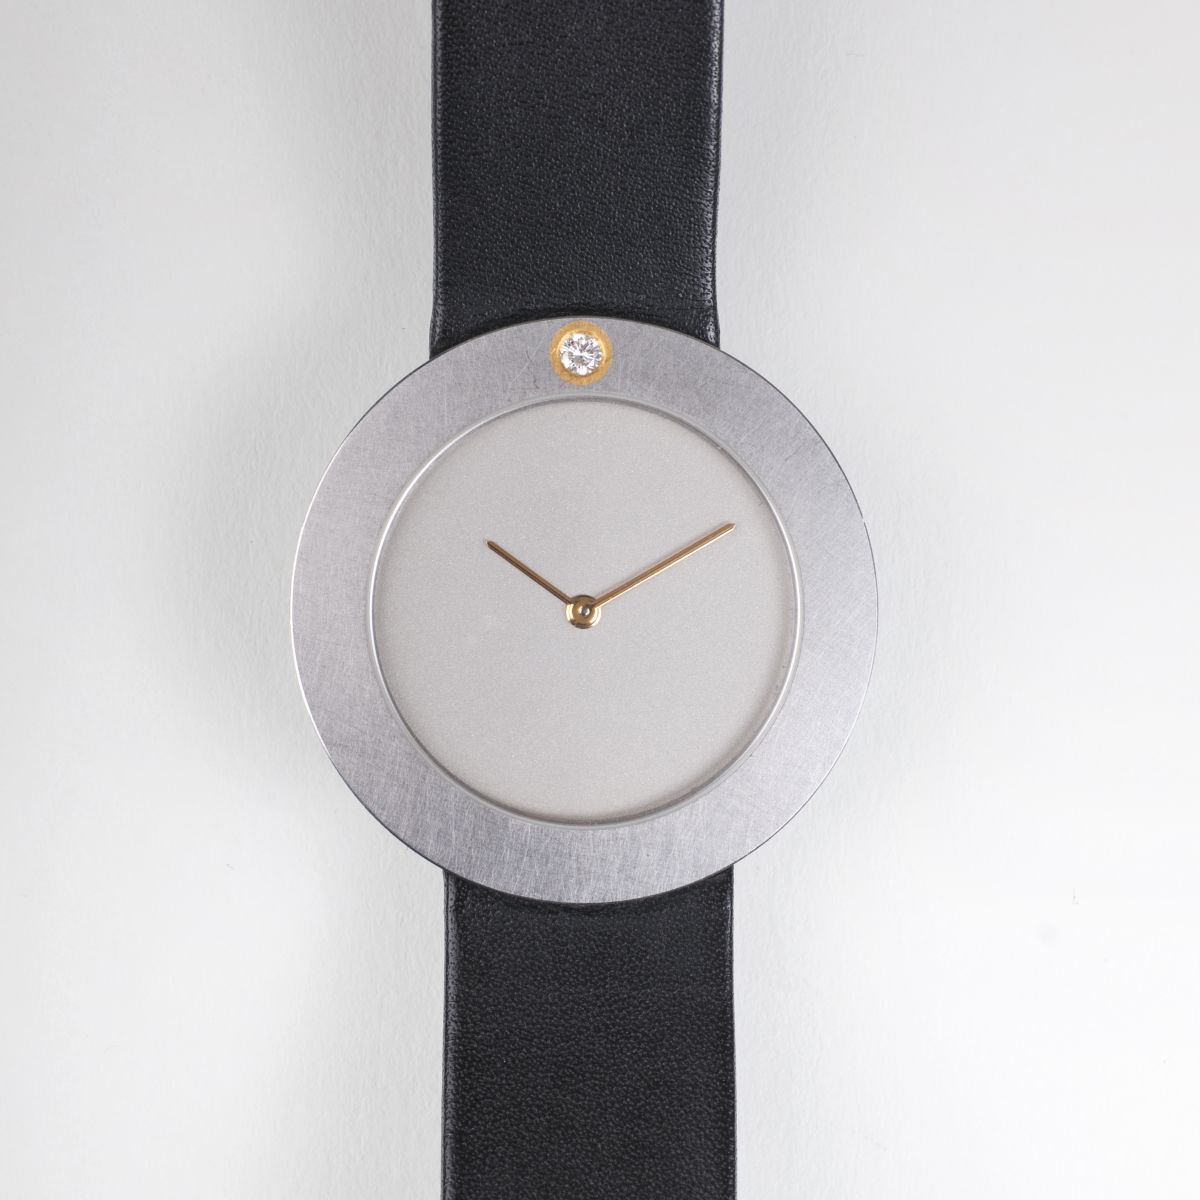 An unisex watch with solitaire diamond